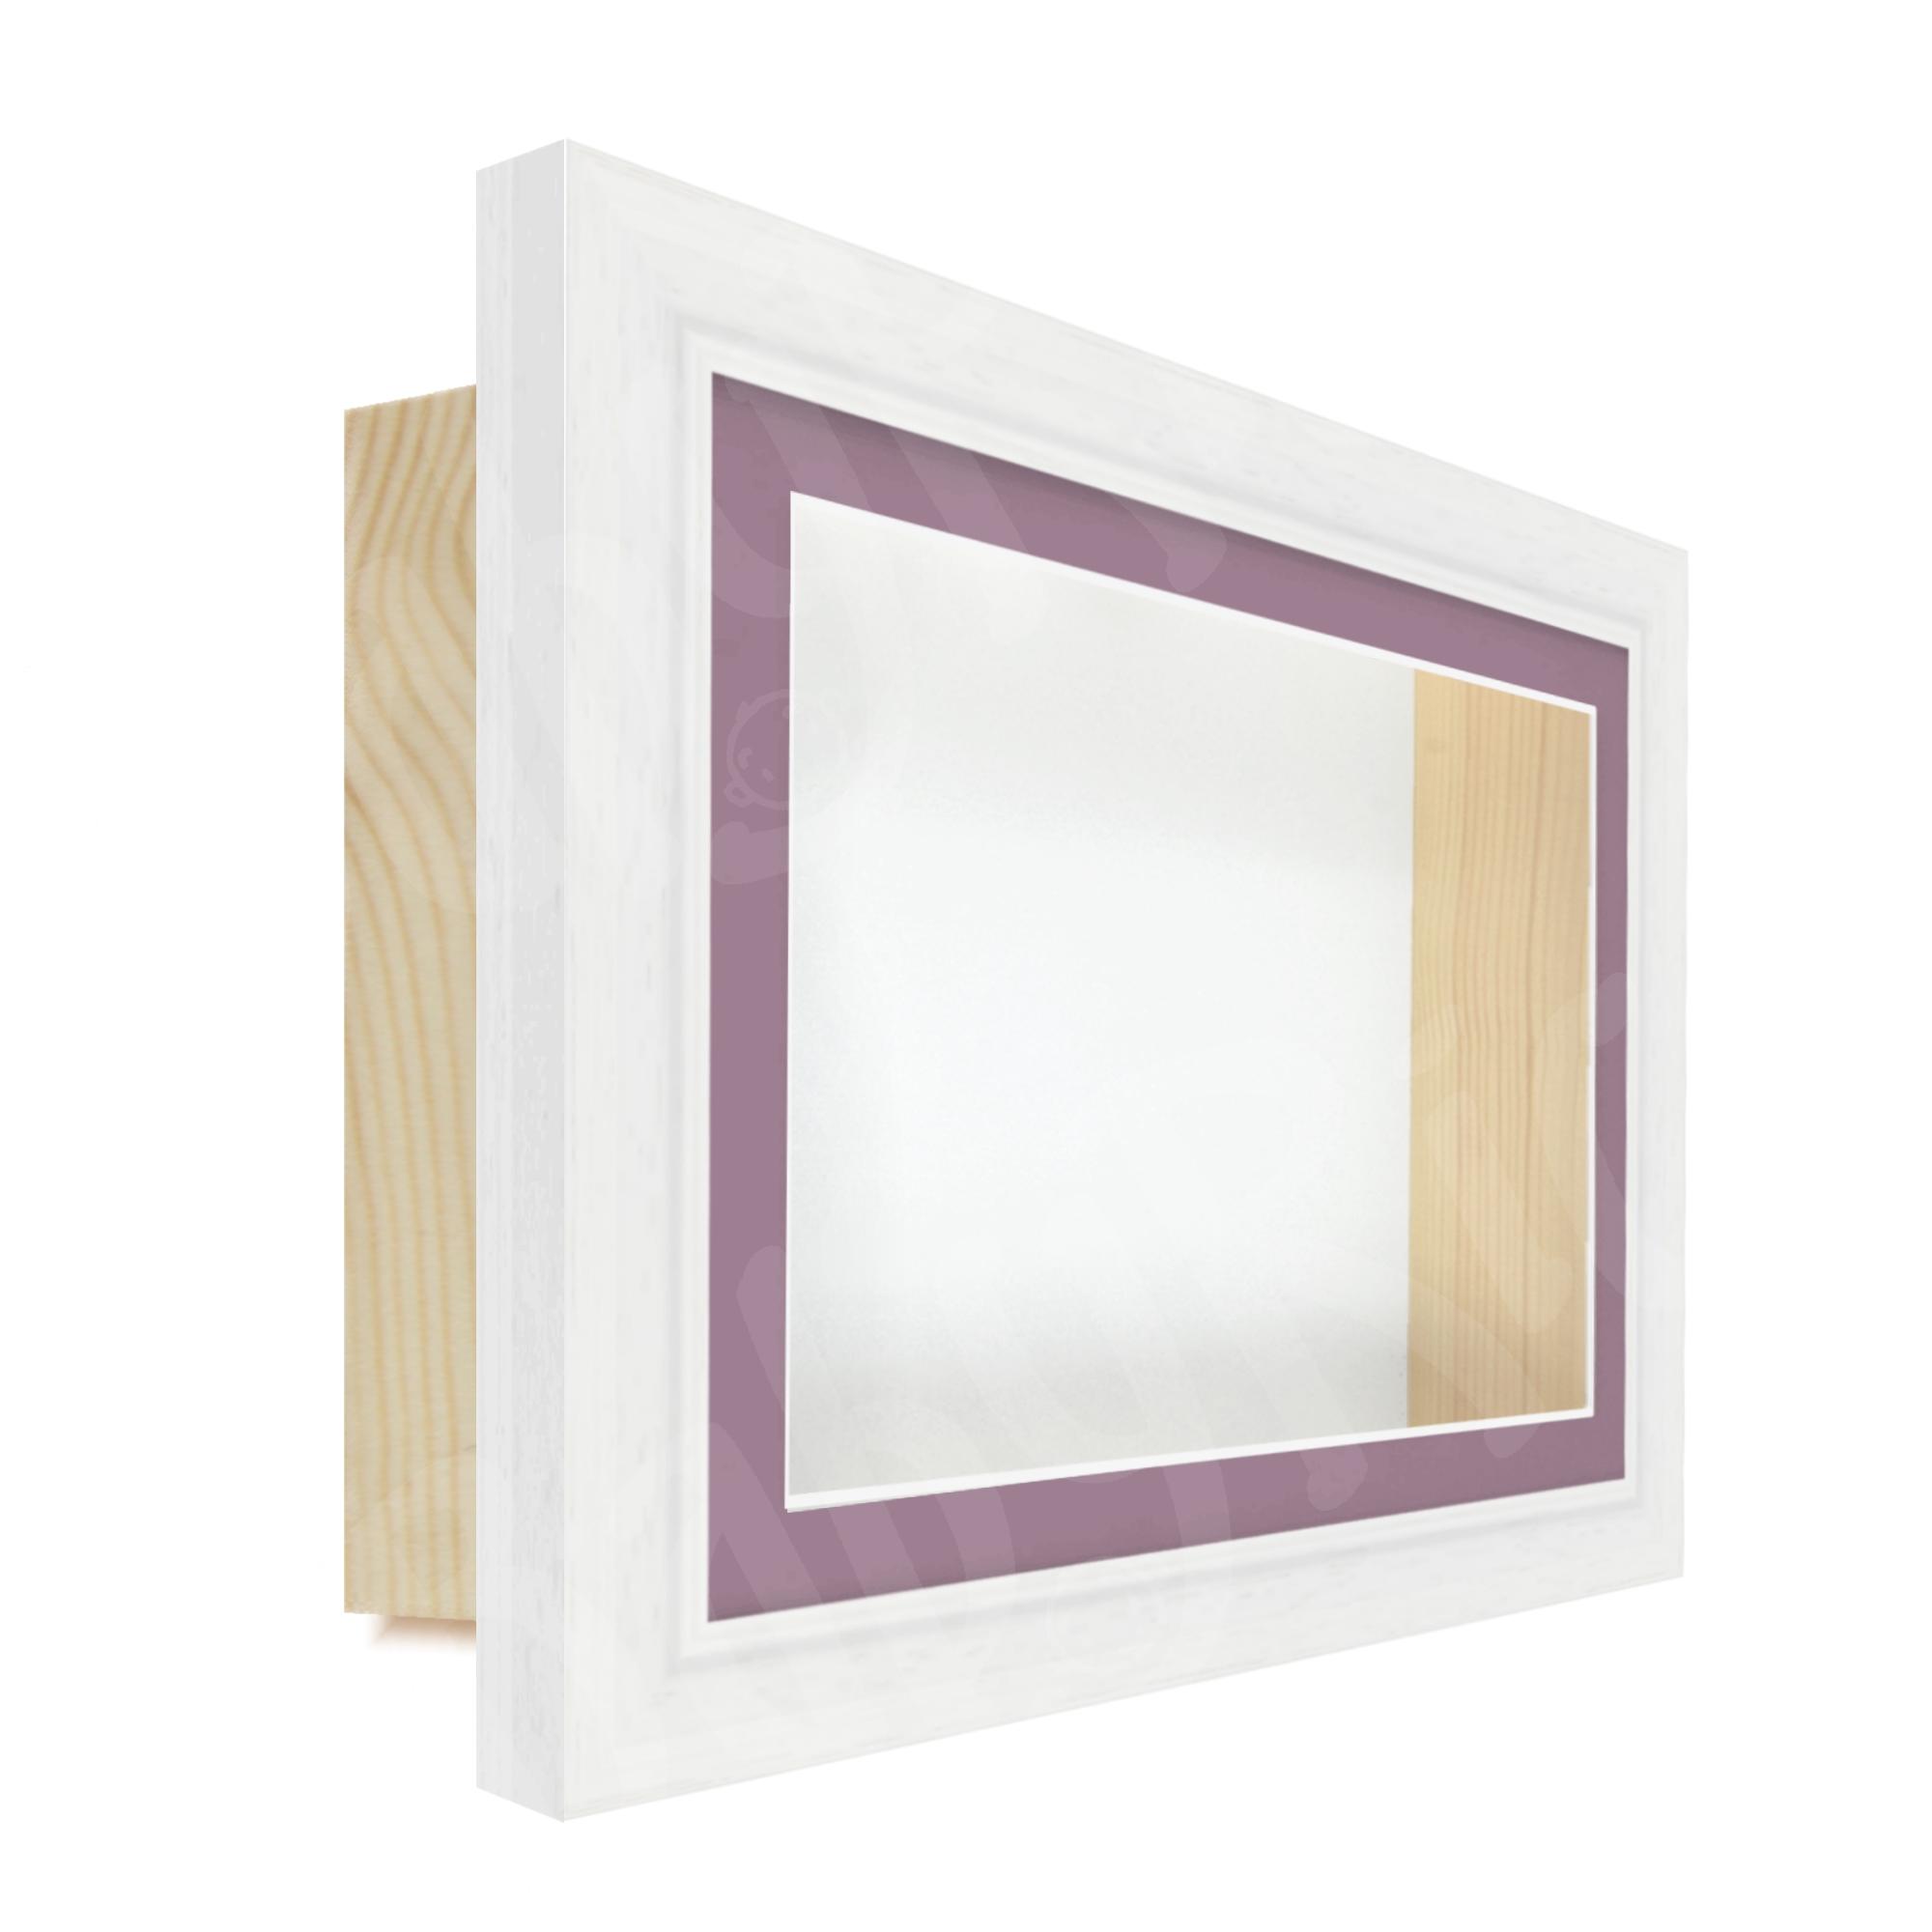 White Wooden Extra Deep Box Large Display Frame